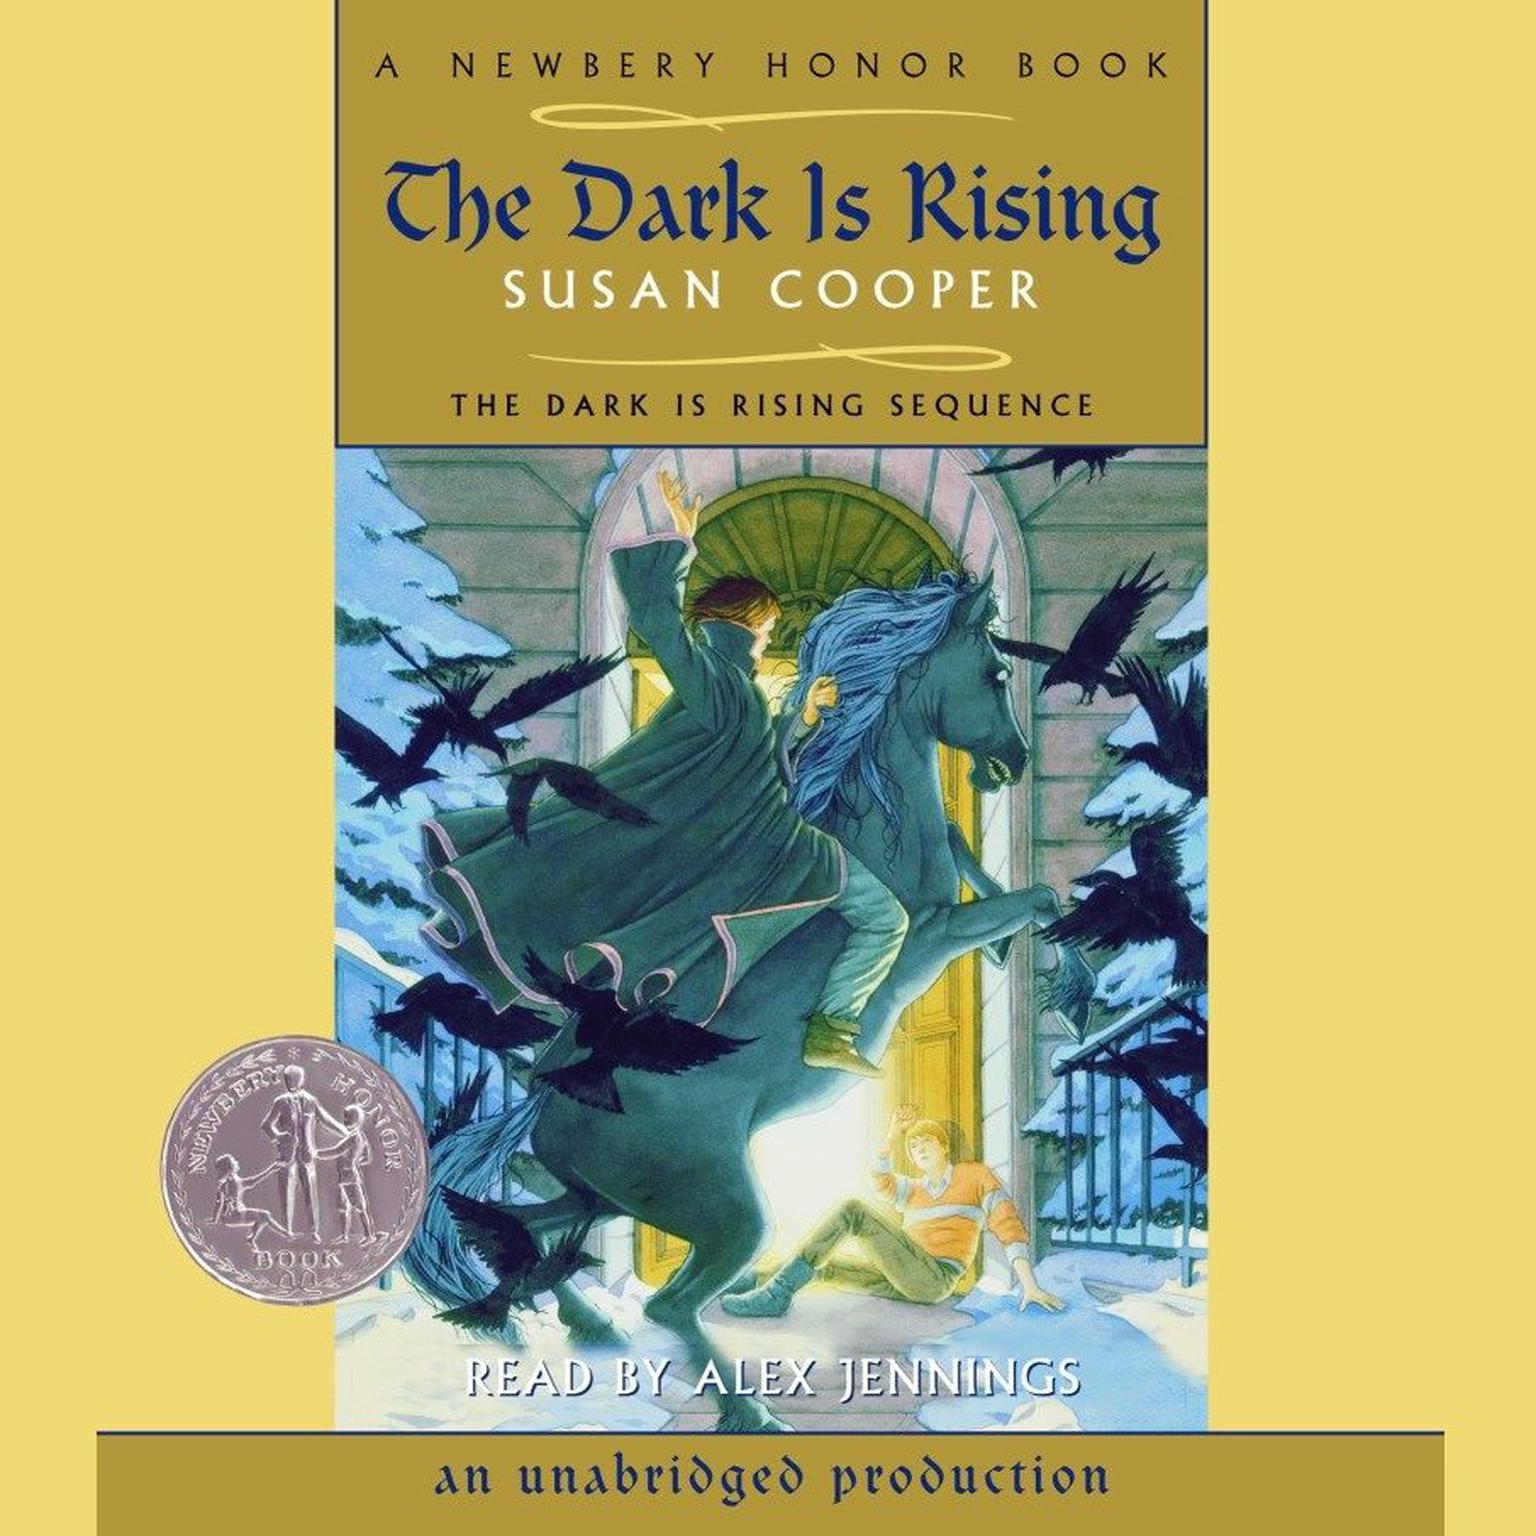 Listen To and Extract of The Dark is Rising Audiobook